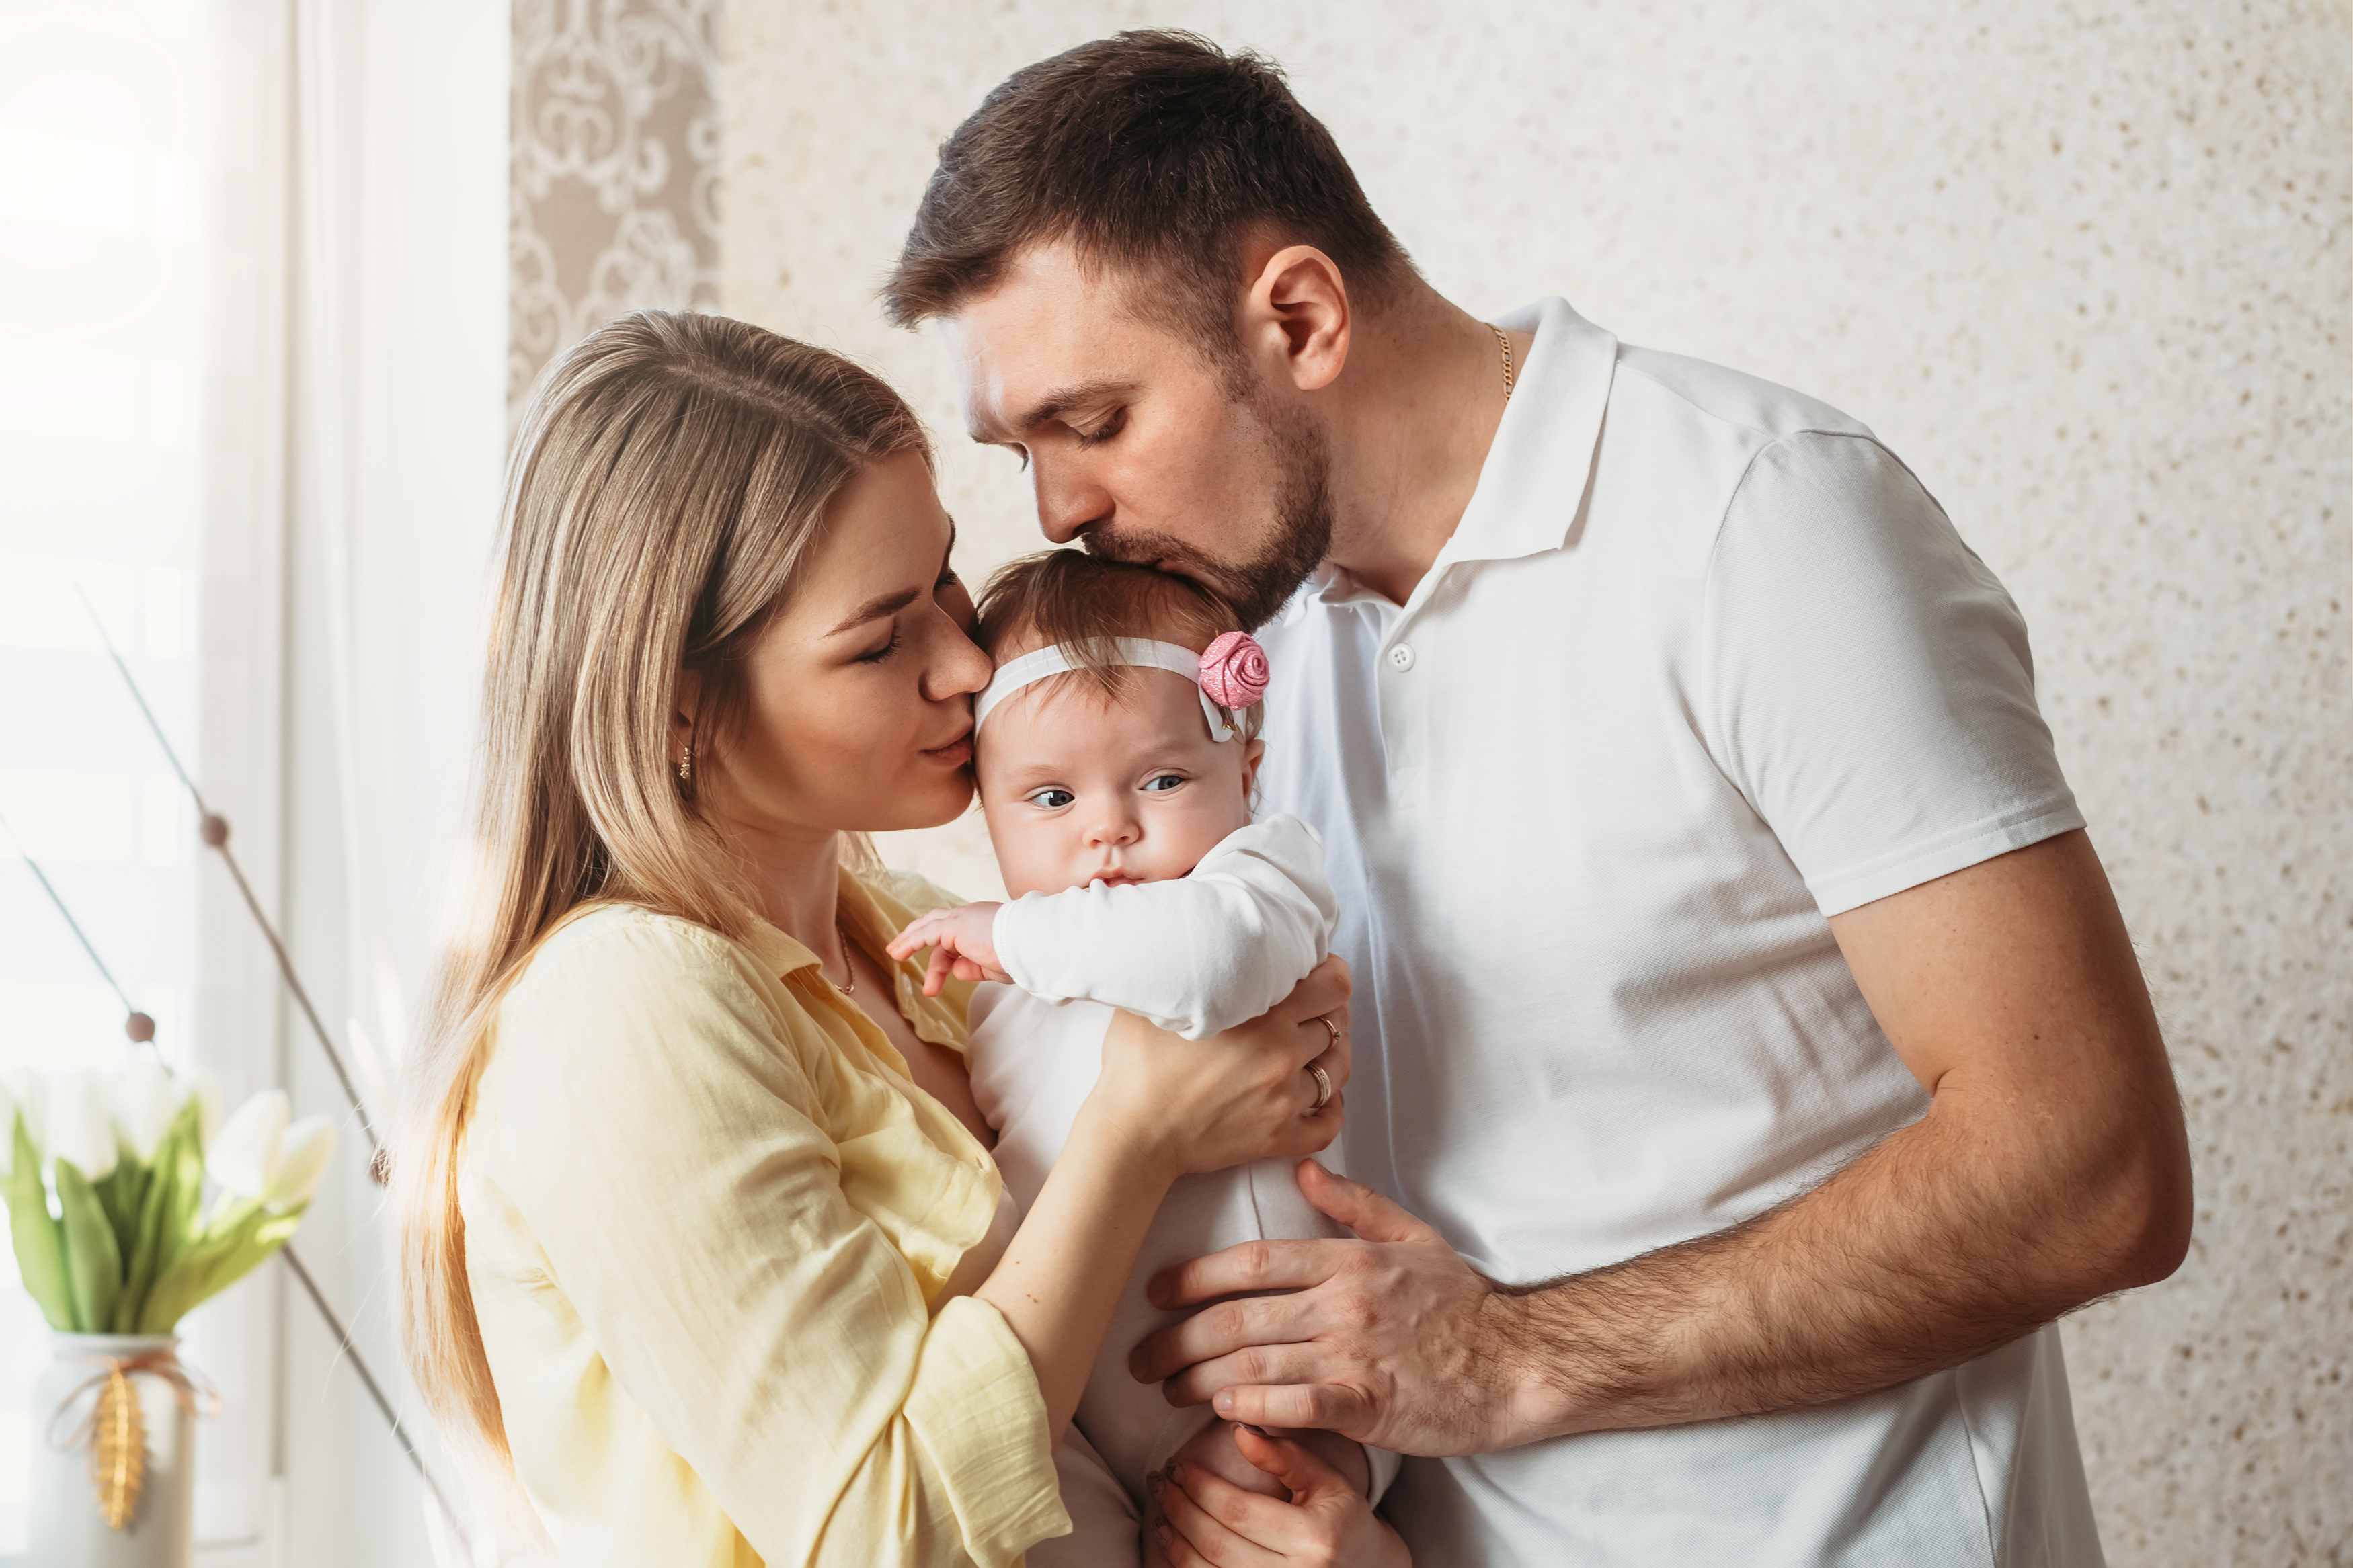 A couple kissing their baby | Source: Shutterstock